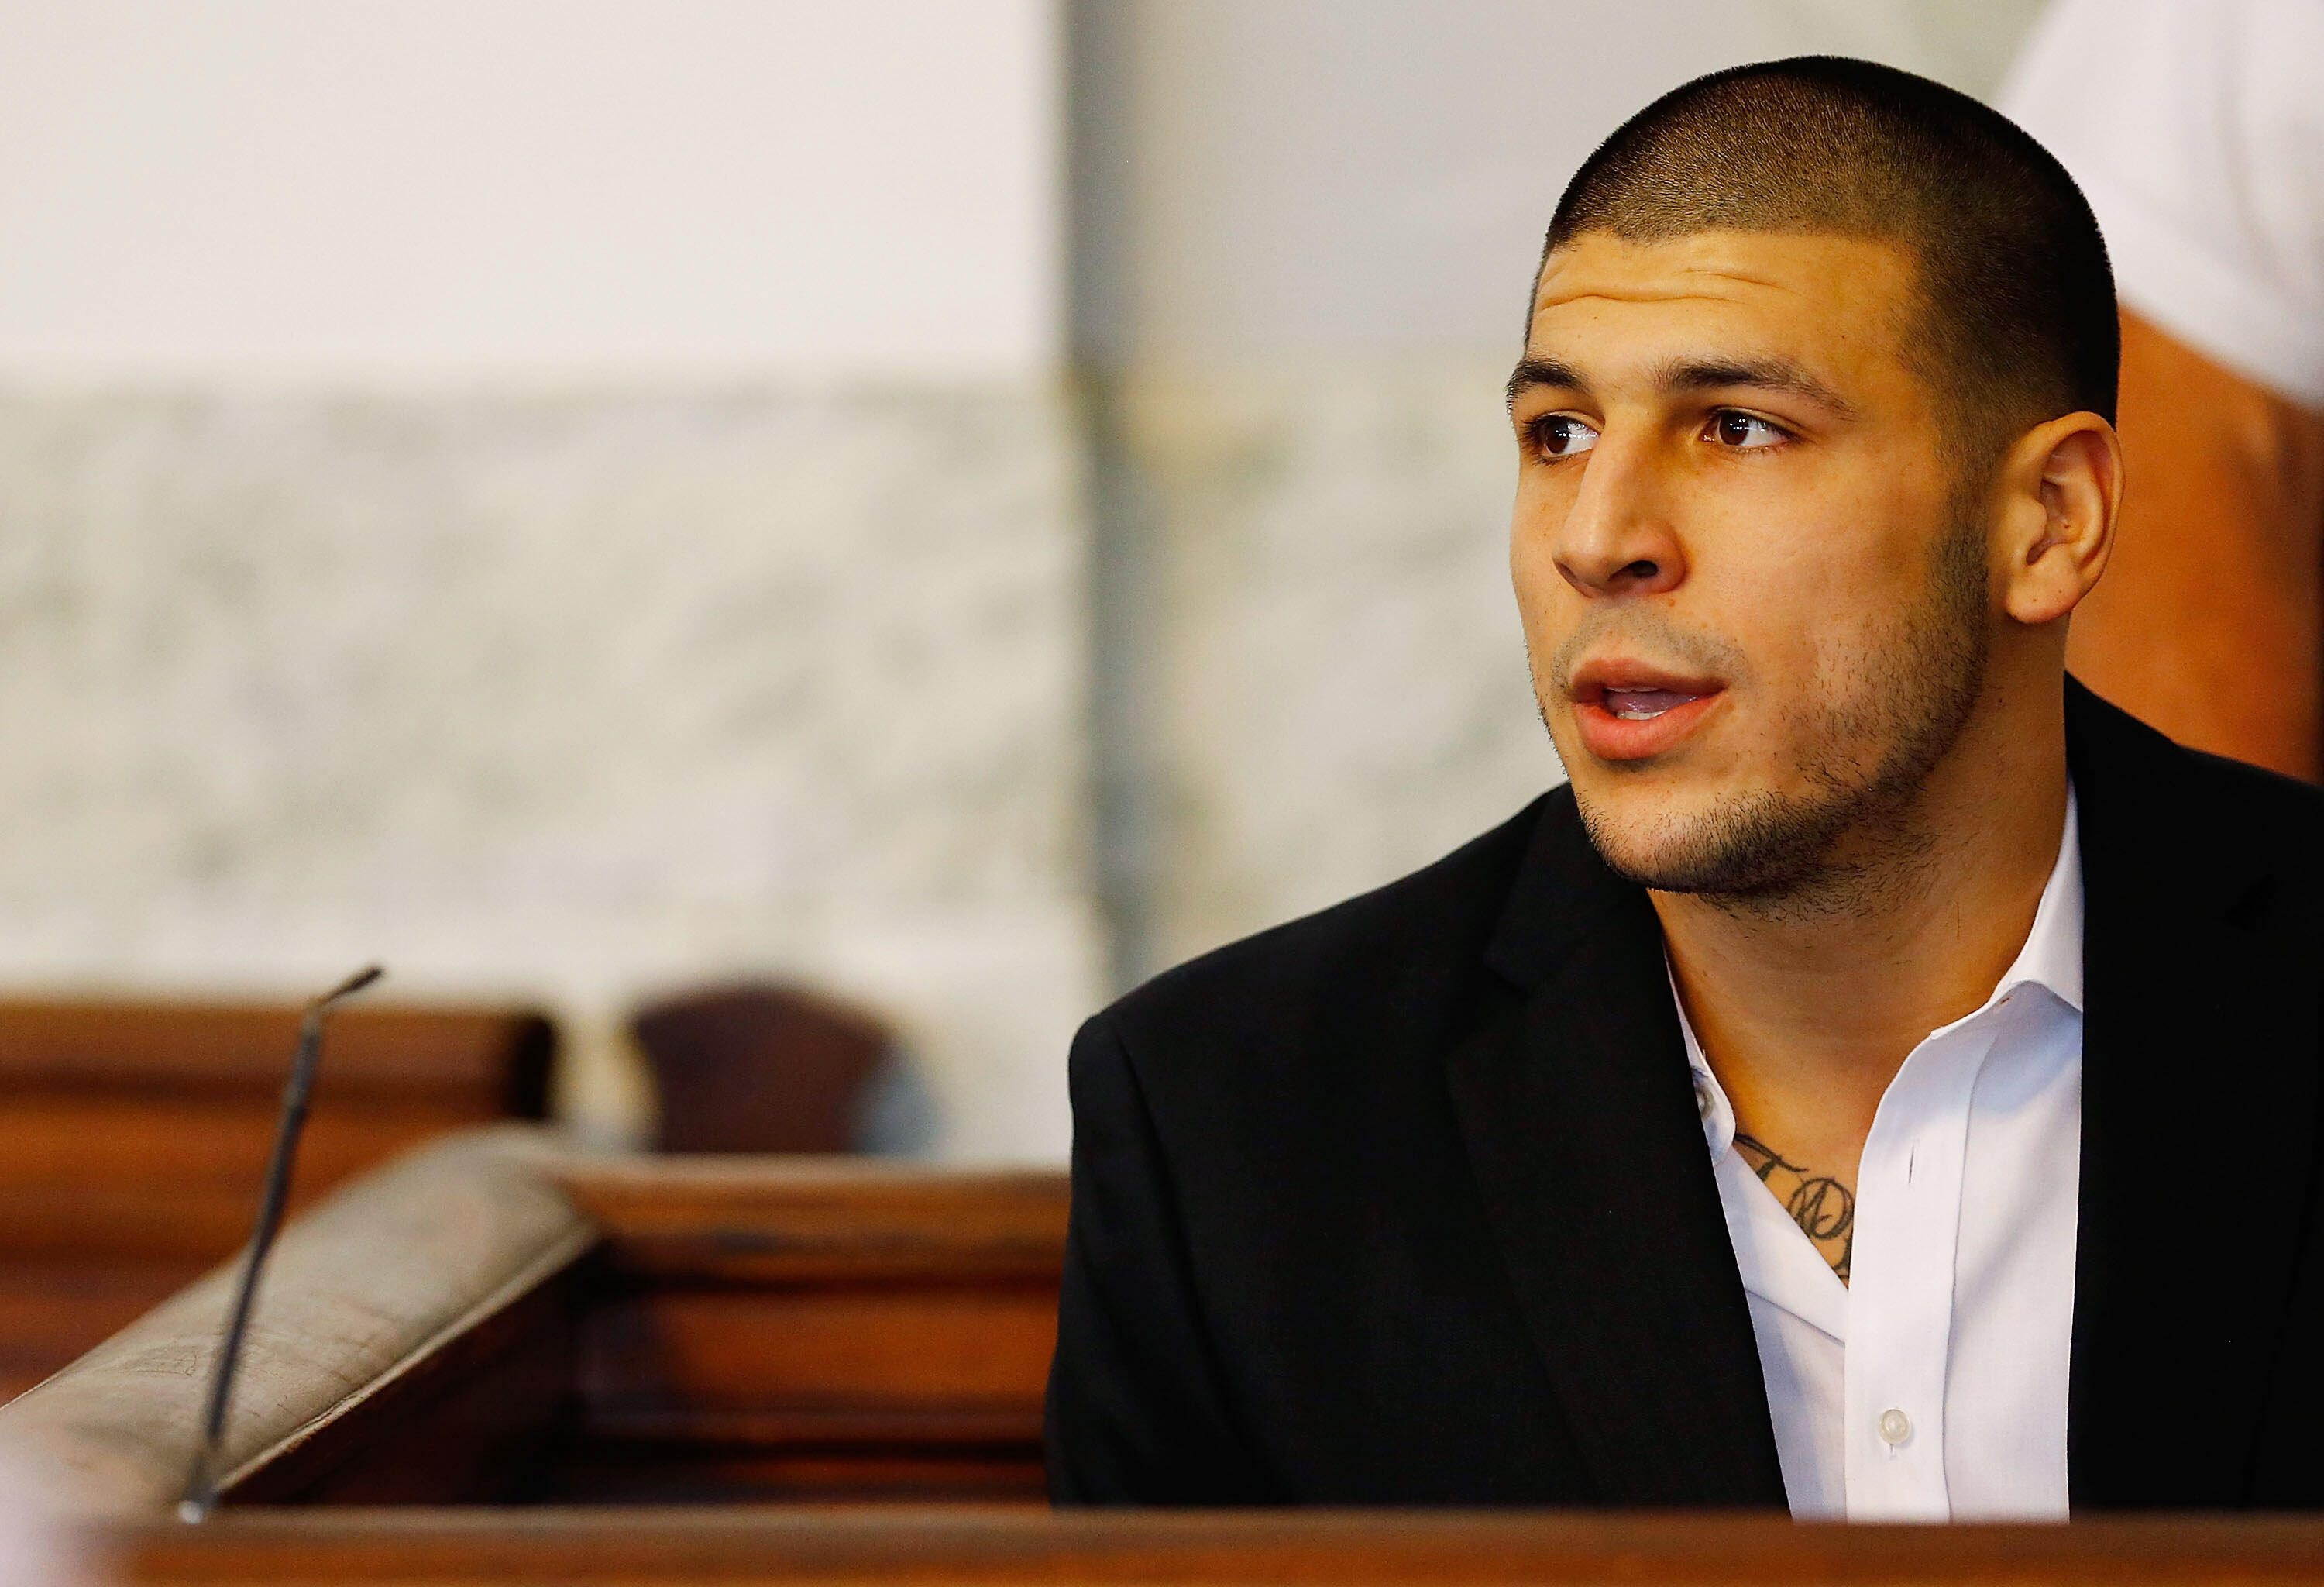 NORTH ATTLEBORO, MA - AUGUST 22: Aaron Hernandez sits in the courtroom of the Attleboro District Court during his hearing on August 22, 2013 in North Attleboro, Massachusetts. Former New England Patriot Aaron Hernandez has been indicted on a first-degree 